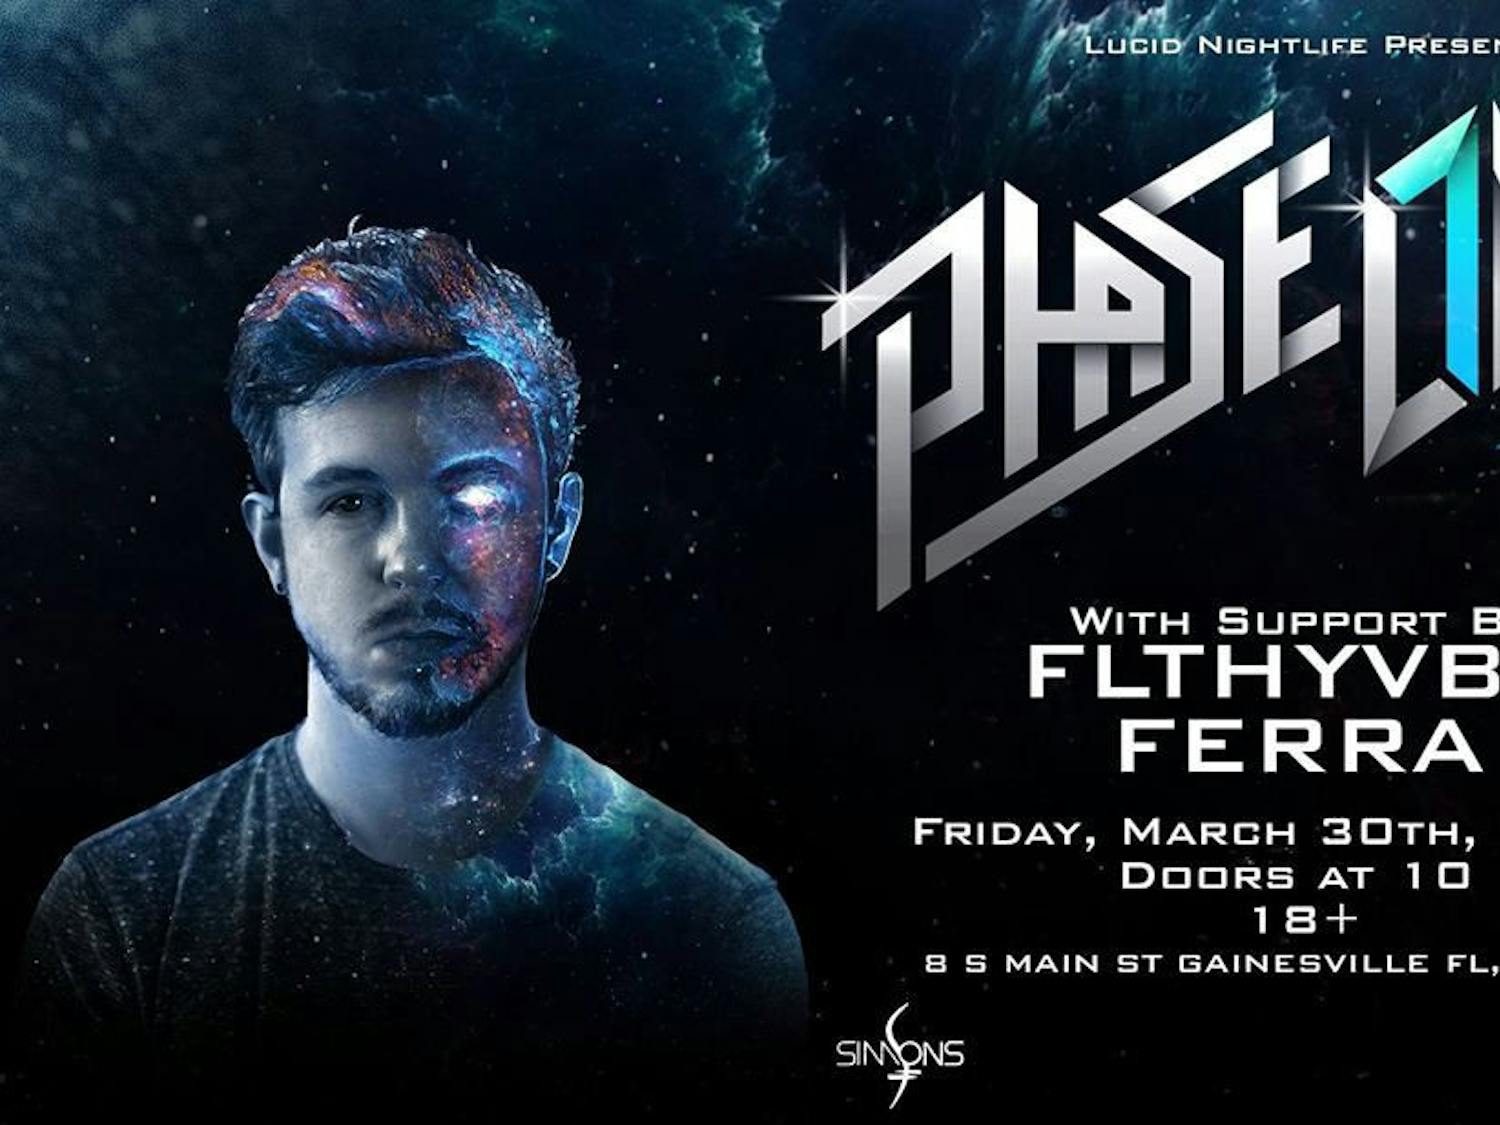 Australia-based artist PhaseOne’s fusion of heavy metal and bass music has taken him on tour all around the world.
&nbsp;